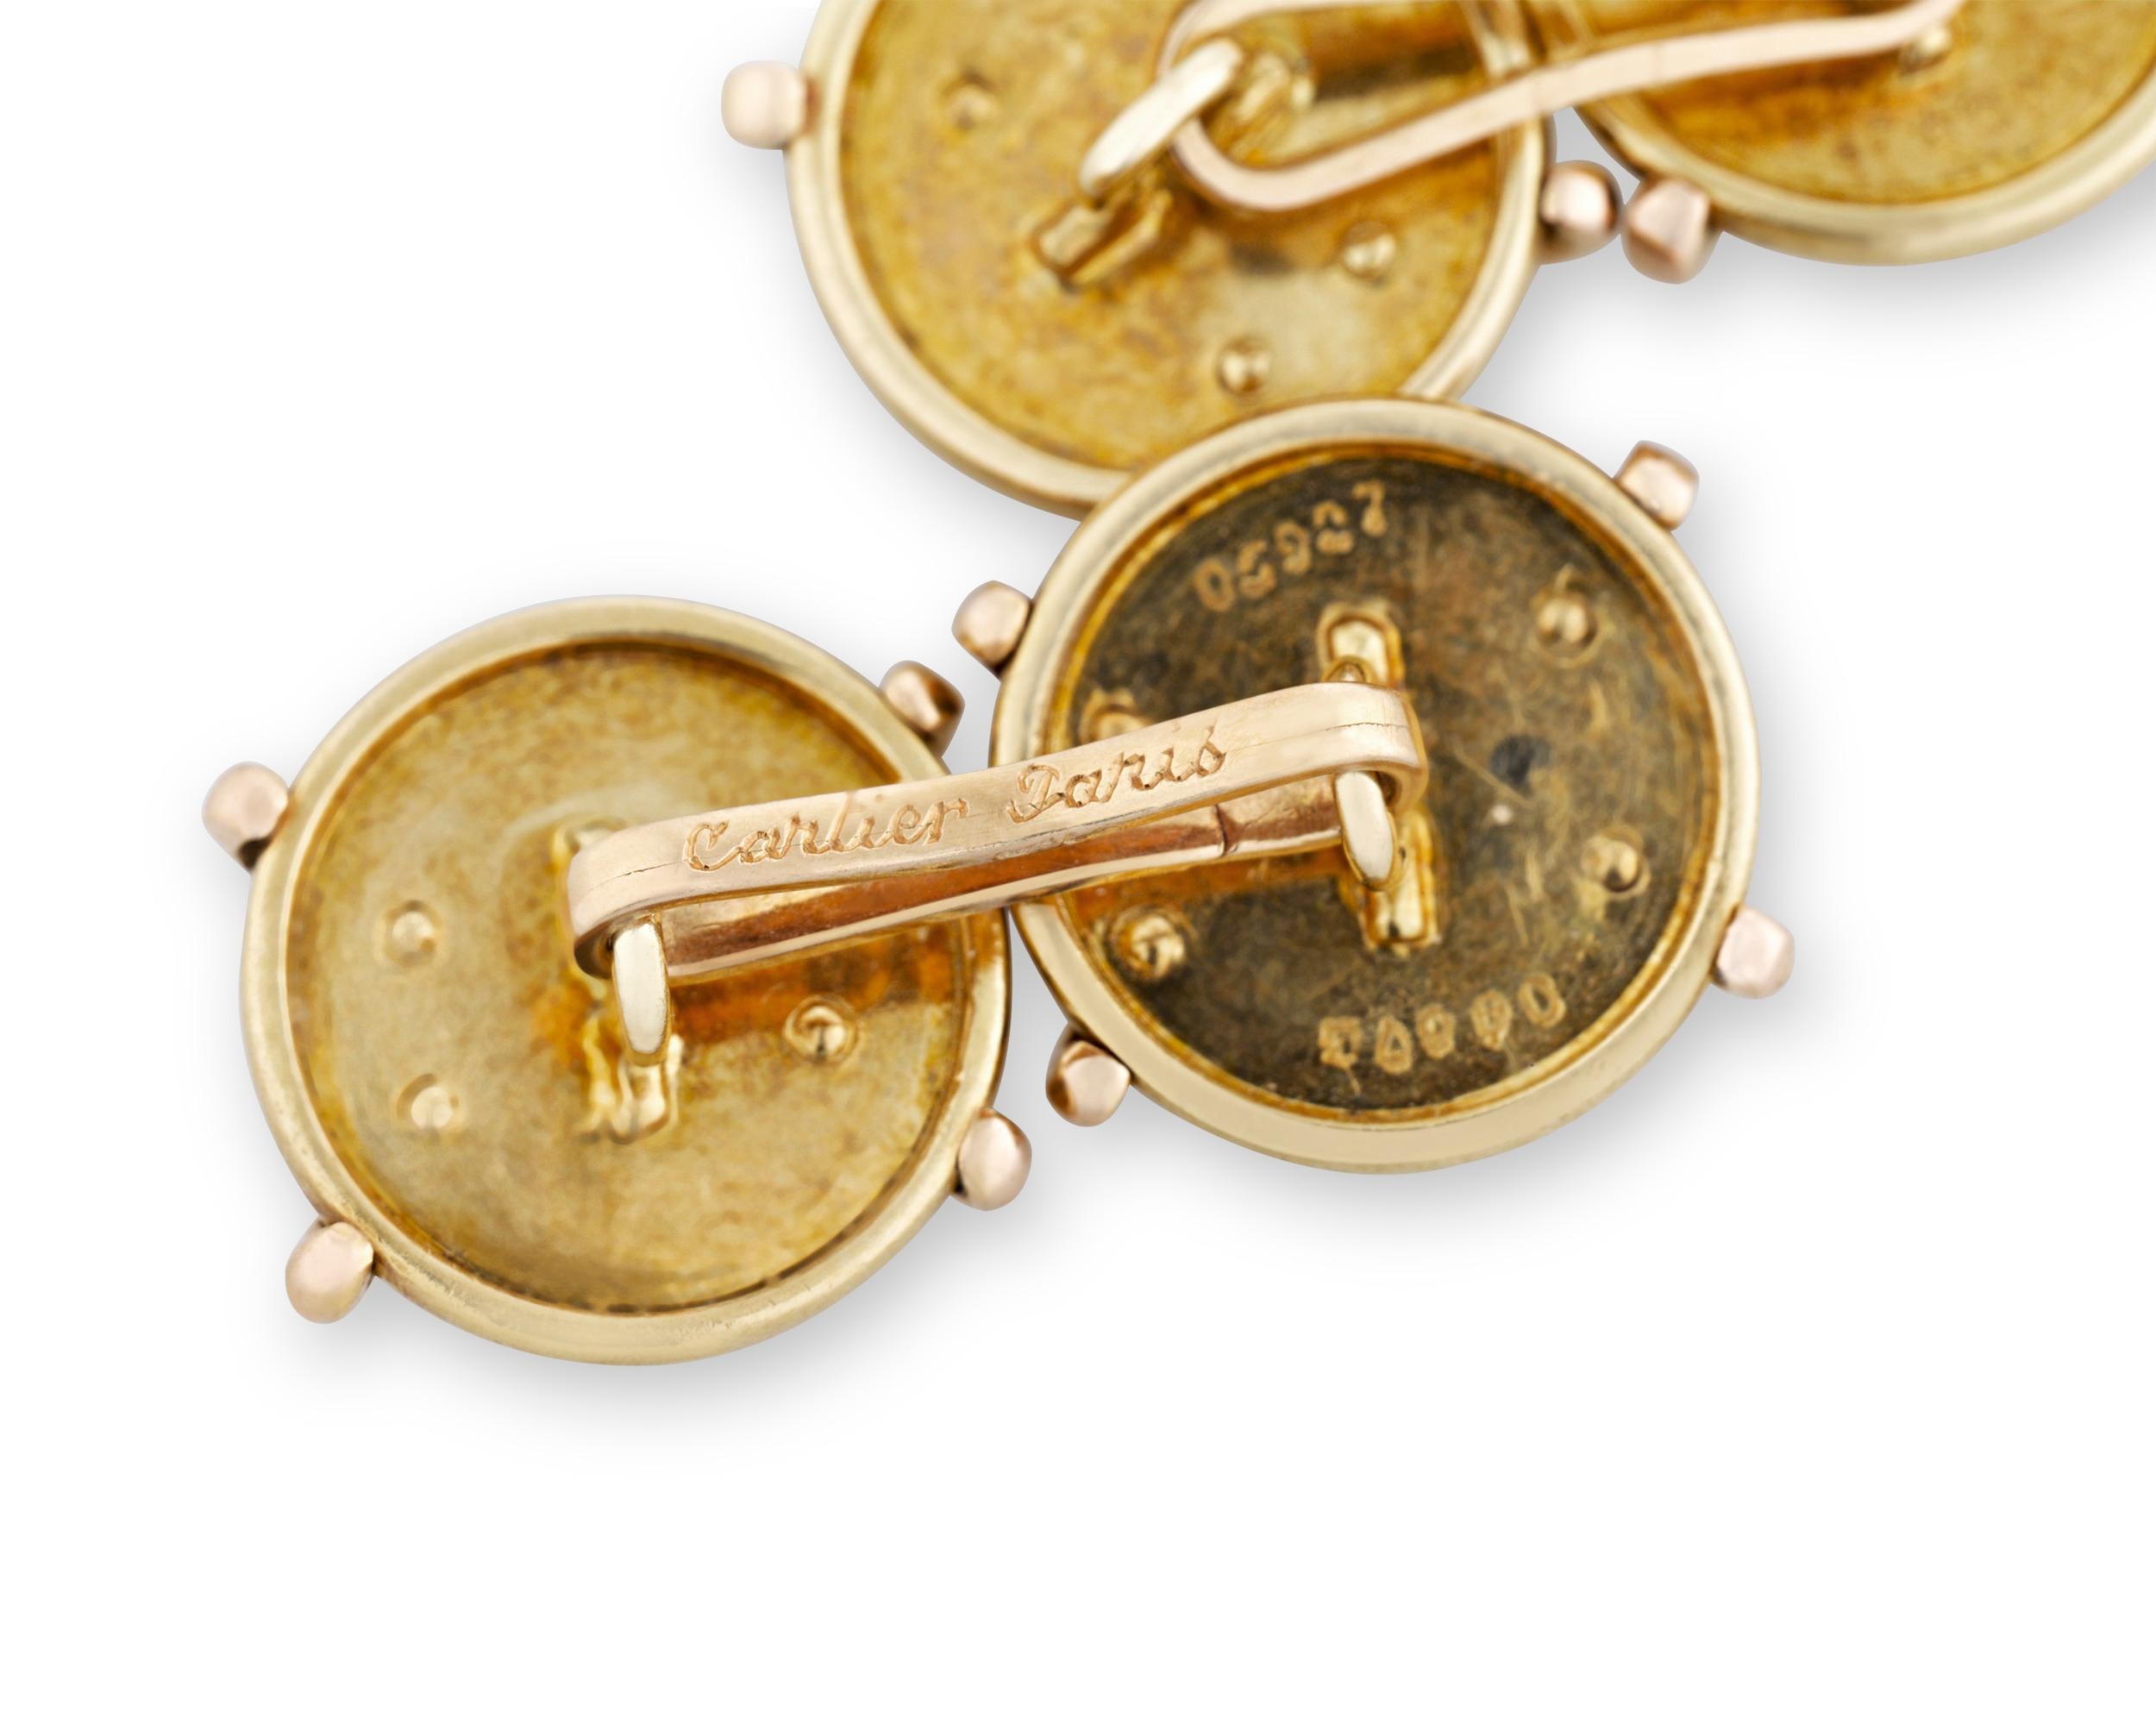 Retro Gold Cufflinks by Cartier In Excellent Condition For Sale In New Orleans, LA